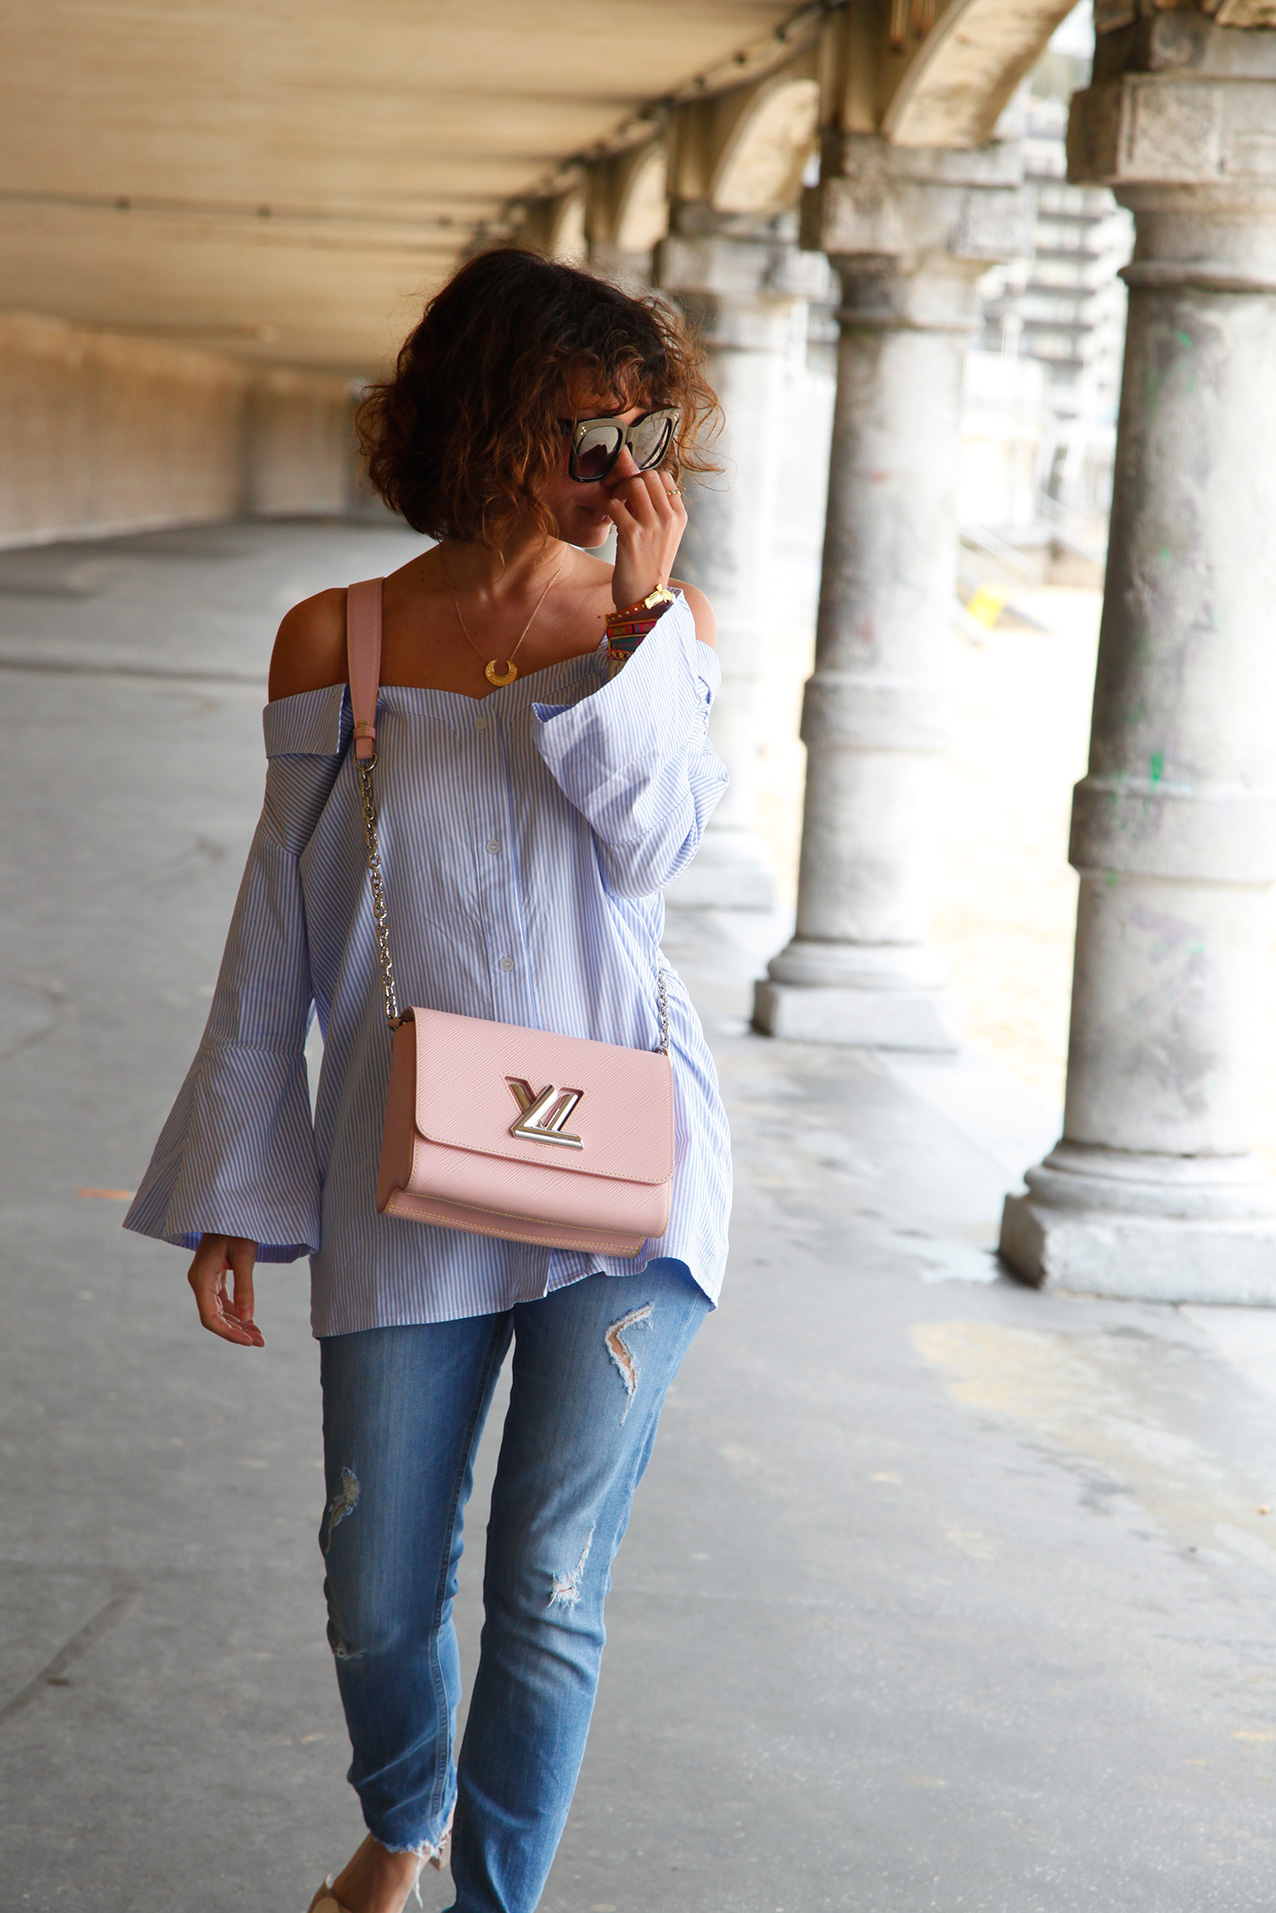 off_the_shoulders_shirt-fench-style-cool_lemonade-streetsyle_blogger